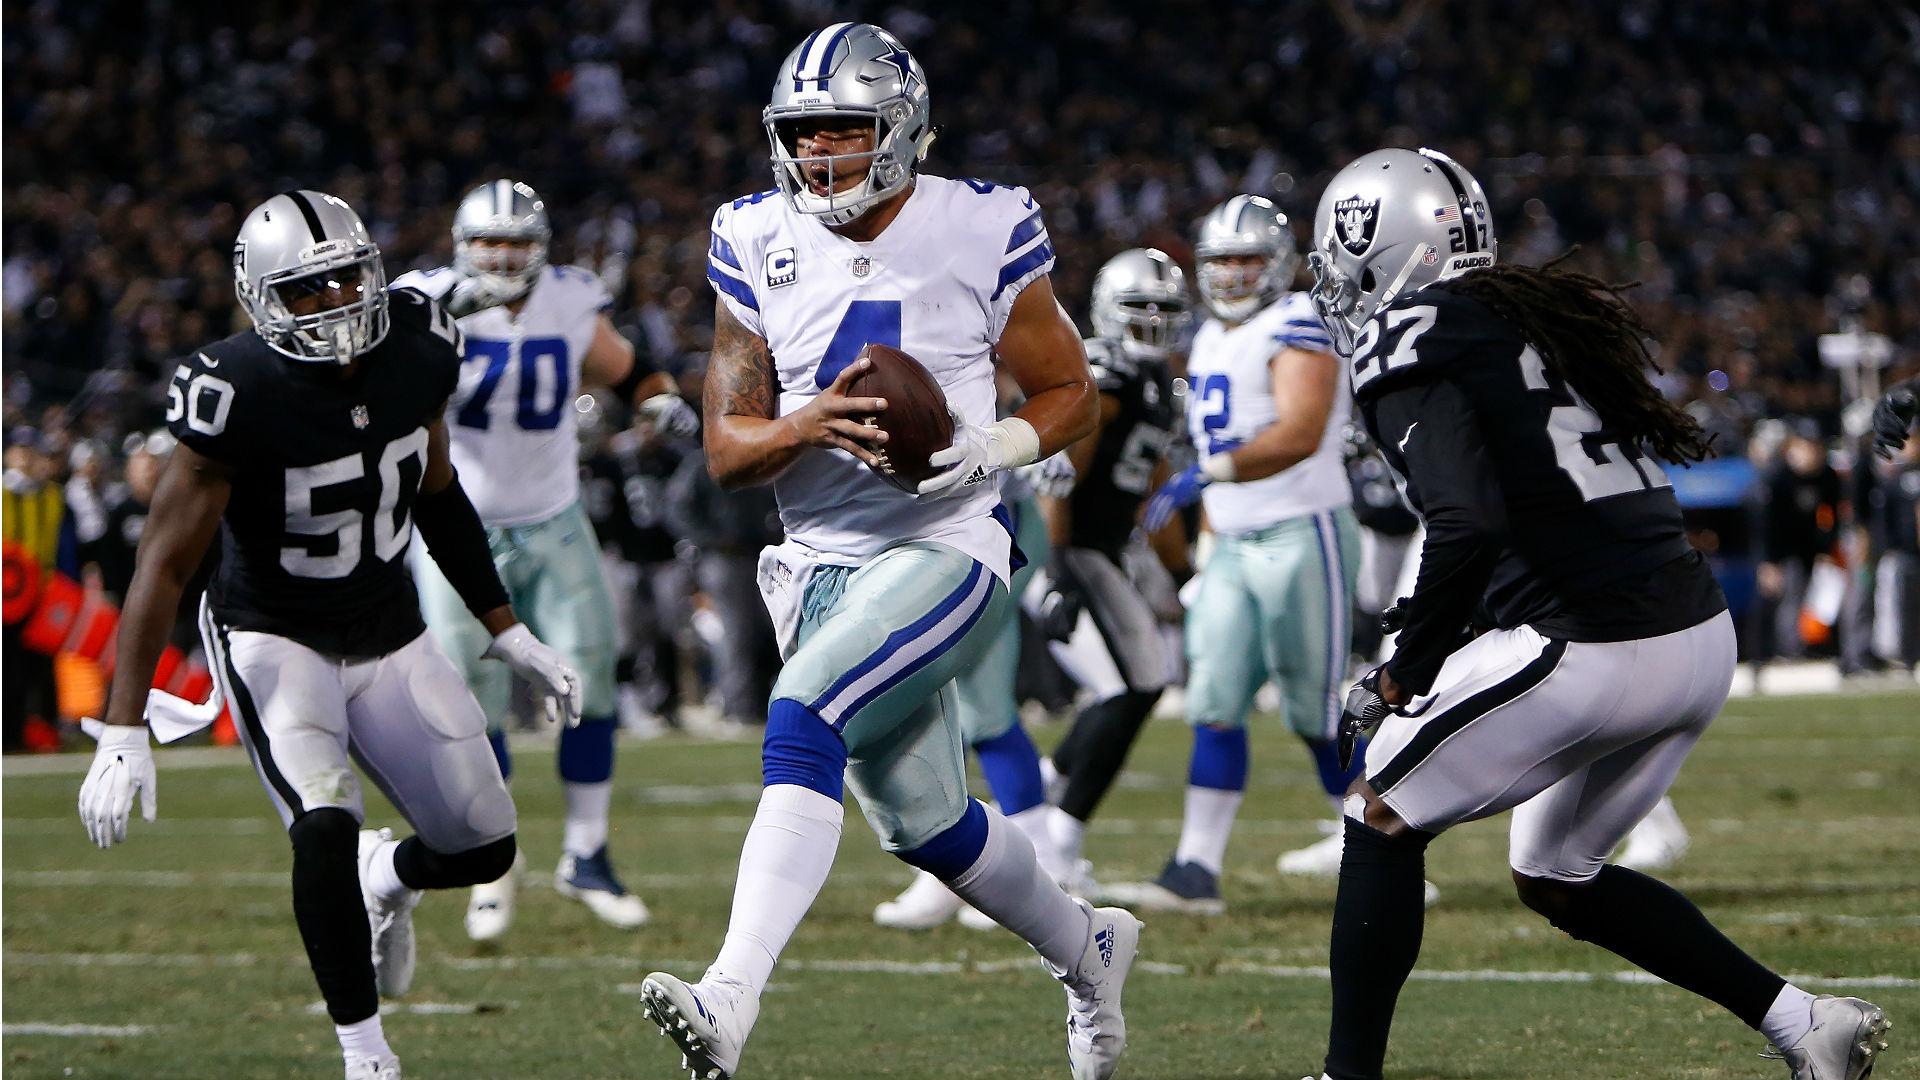 Cowboys vs. Raiders Score, results, highlights from Sunday night game